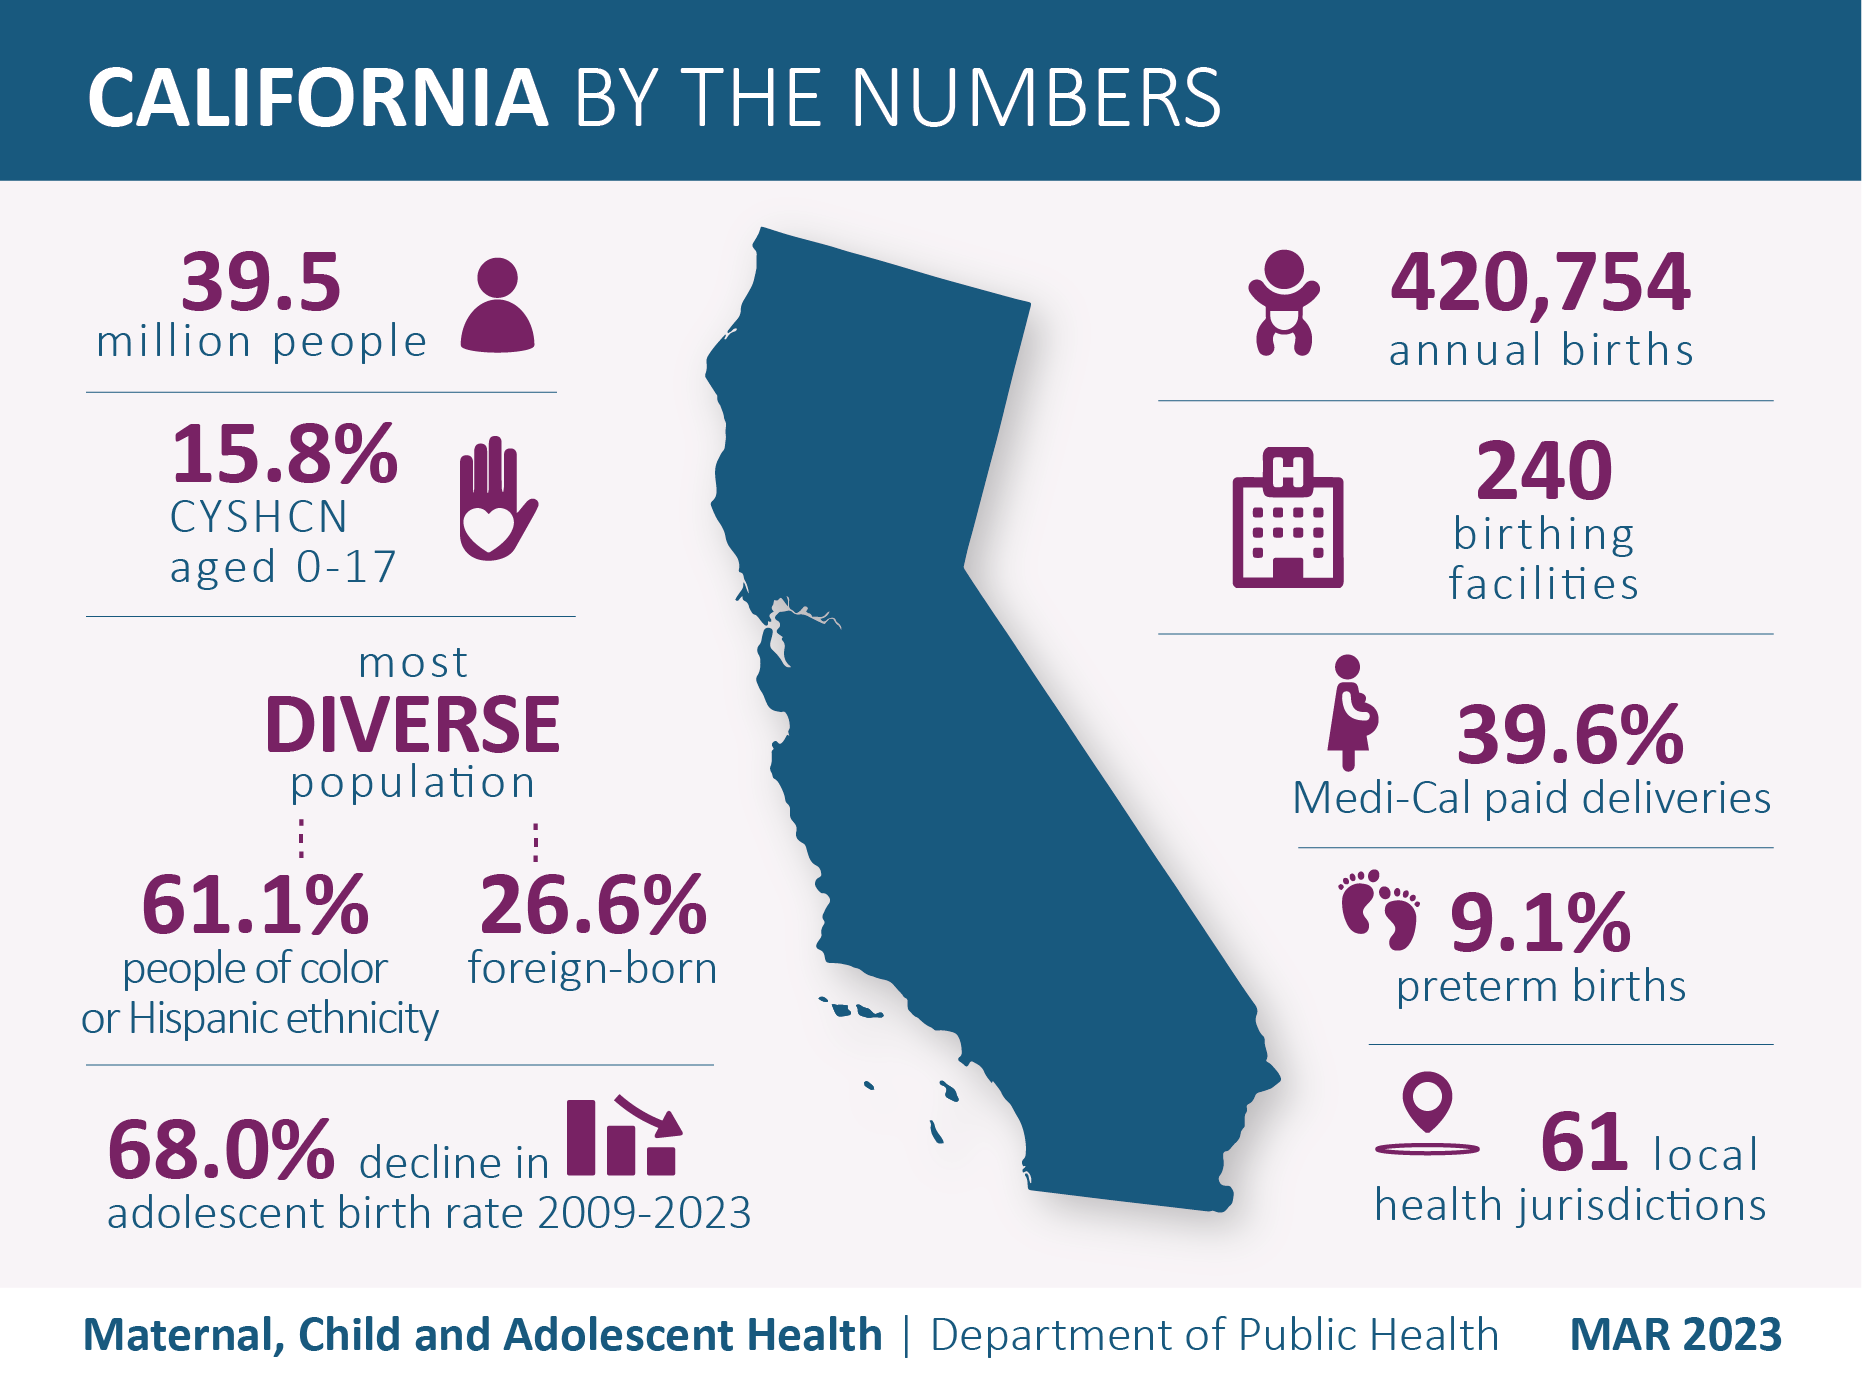 California by the numbers. As of March 2023, California is the most diverse population. Out of 39.5 million people, 61.1% are people of color or Hispanic ethnicity and 26.6% are foreign-born.  15.8% of children and youth ages 0-17 have special health care needs. California had 420,754 annual births with 240 birthing facilities. 39.6% are Medi-Cal paid deliveries and 9.1% preterm births. 61 local health juridictions.